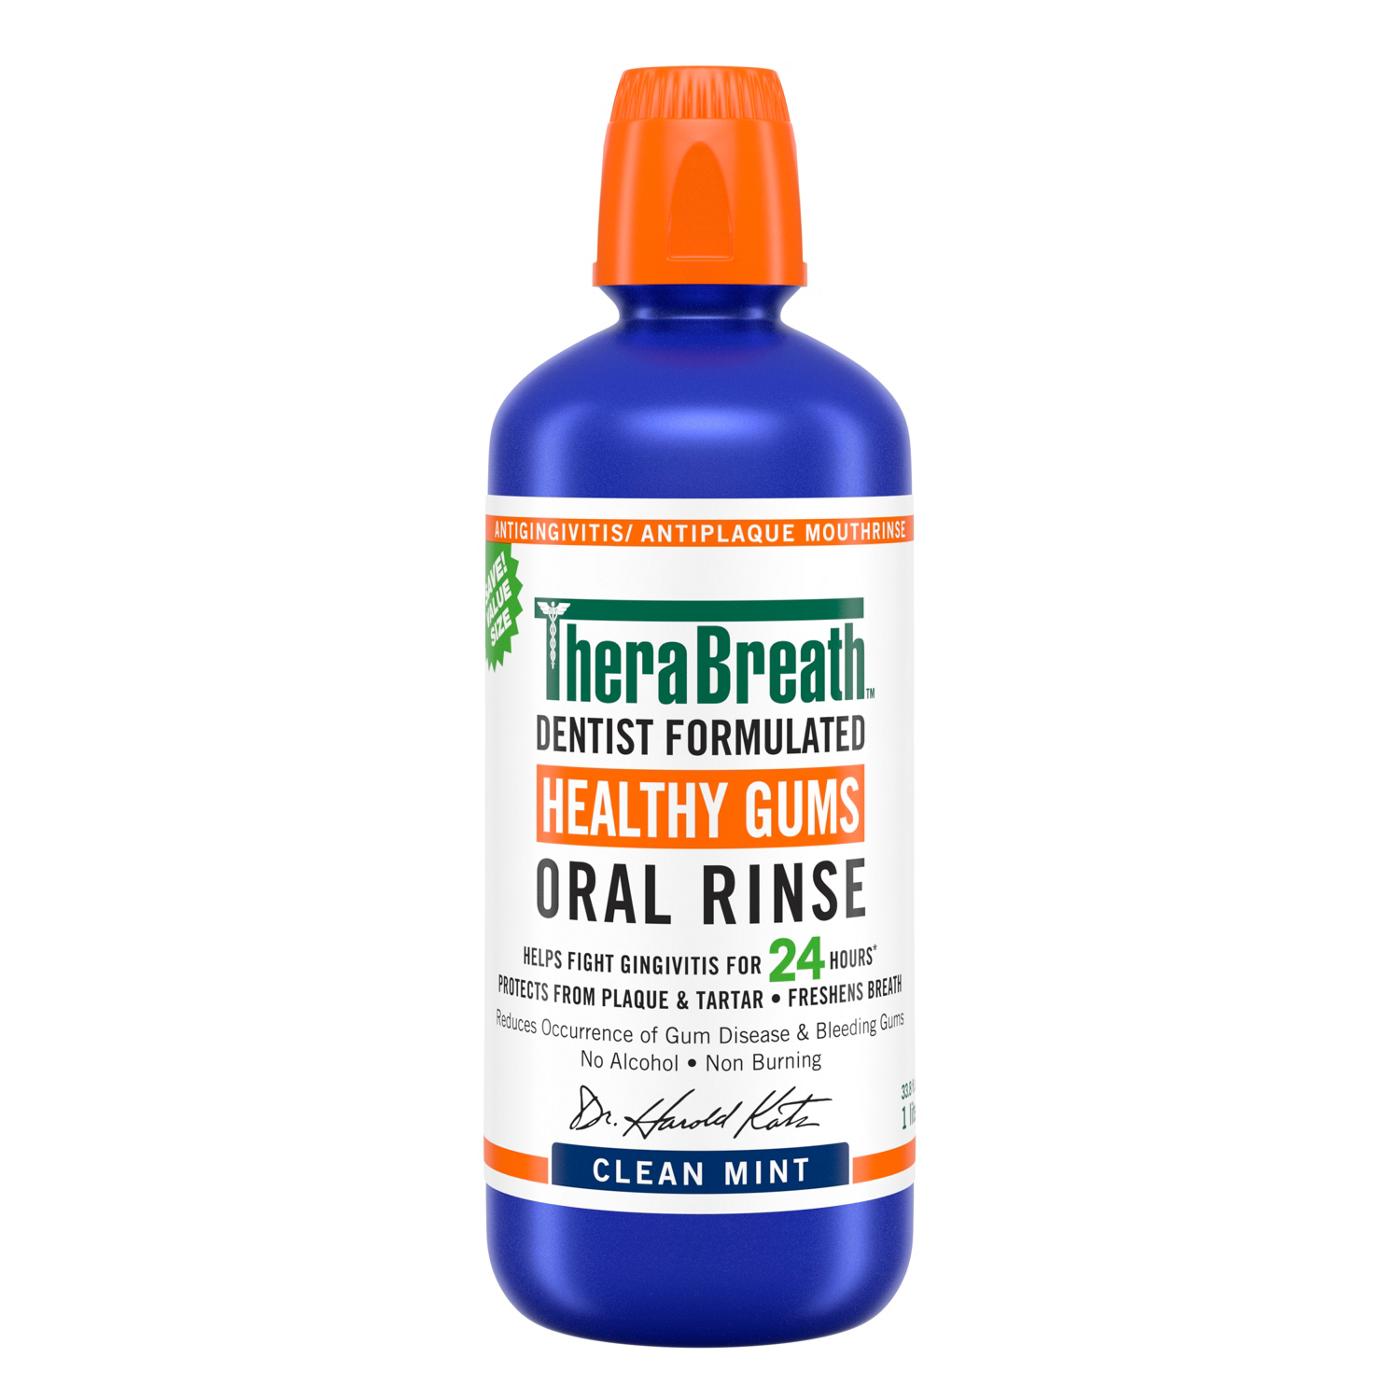 TheraBreath Healthy Gums Oral Rinse - Clean Mint; image 1 of 6